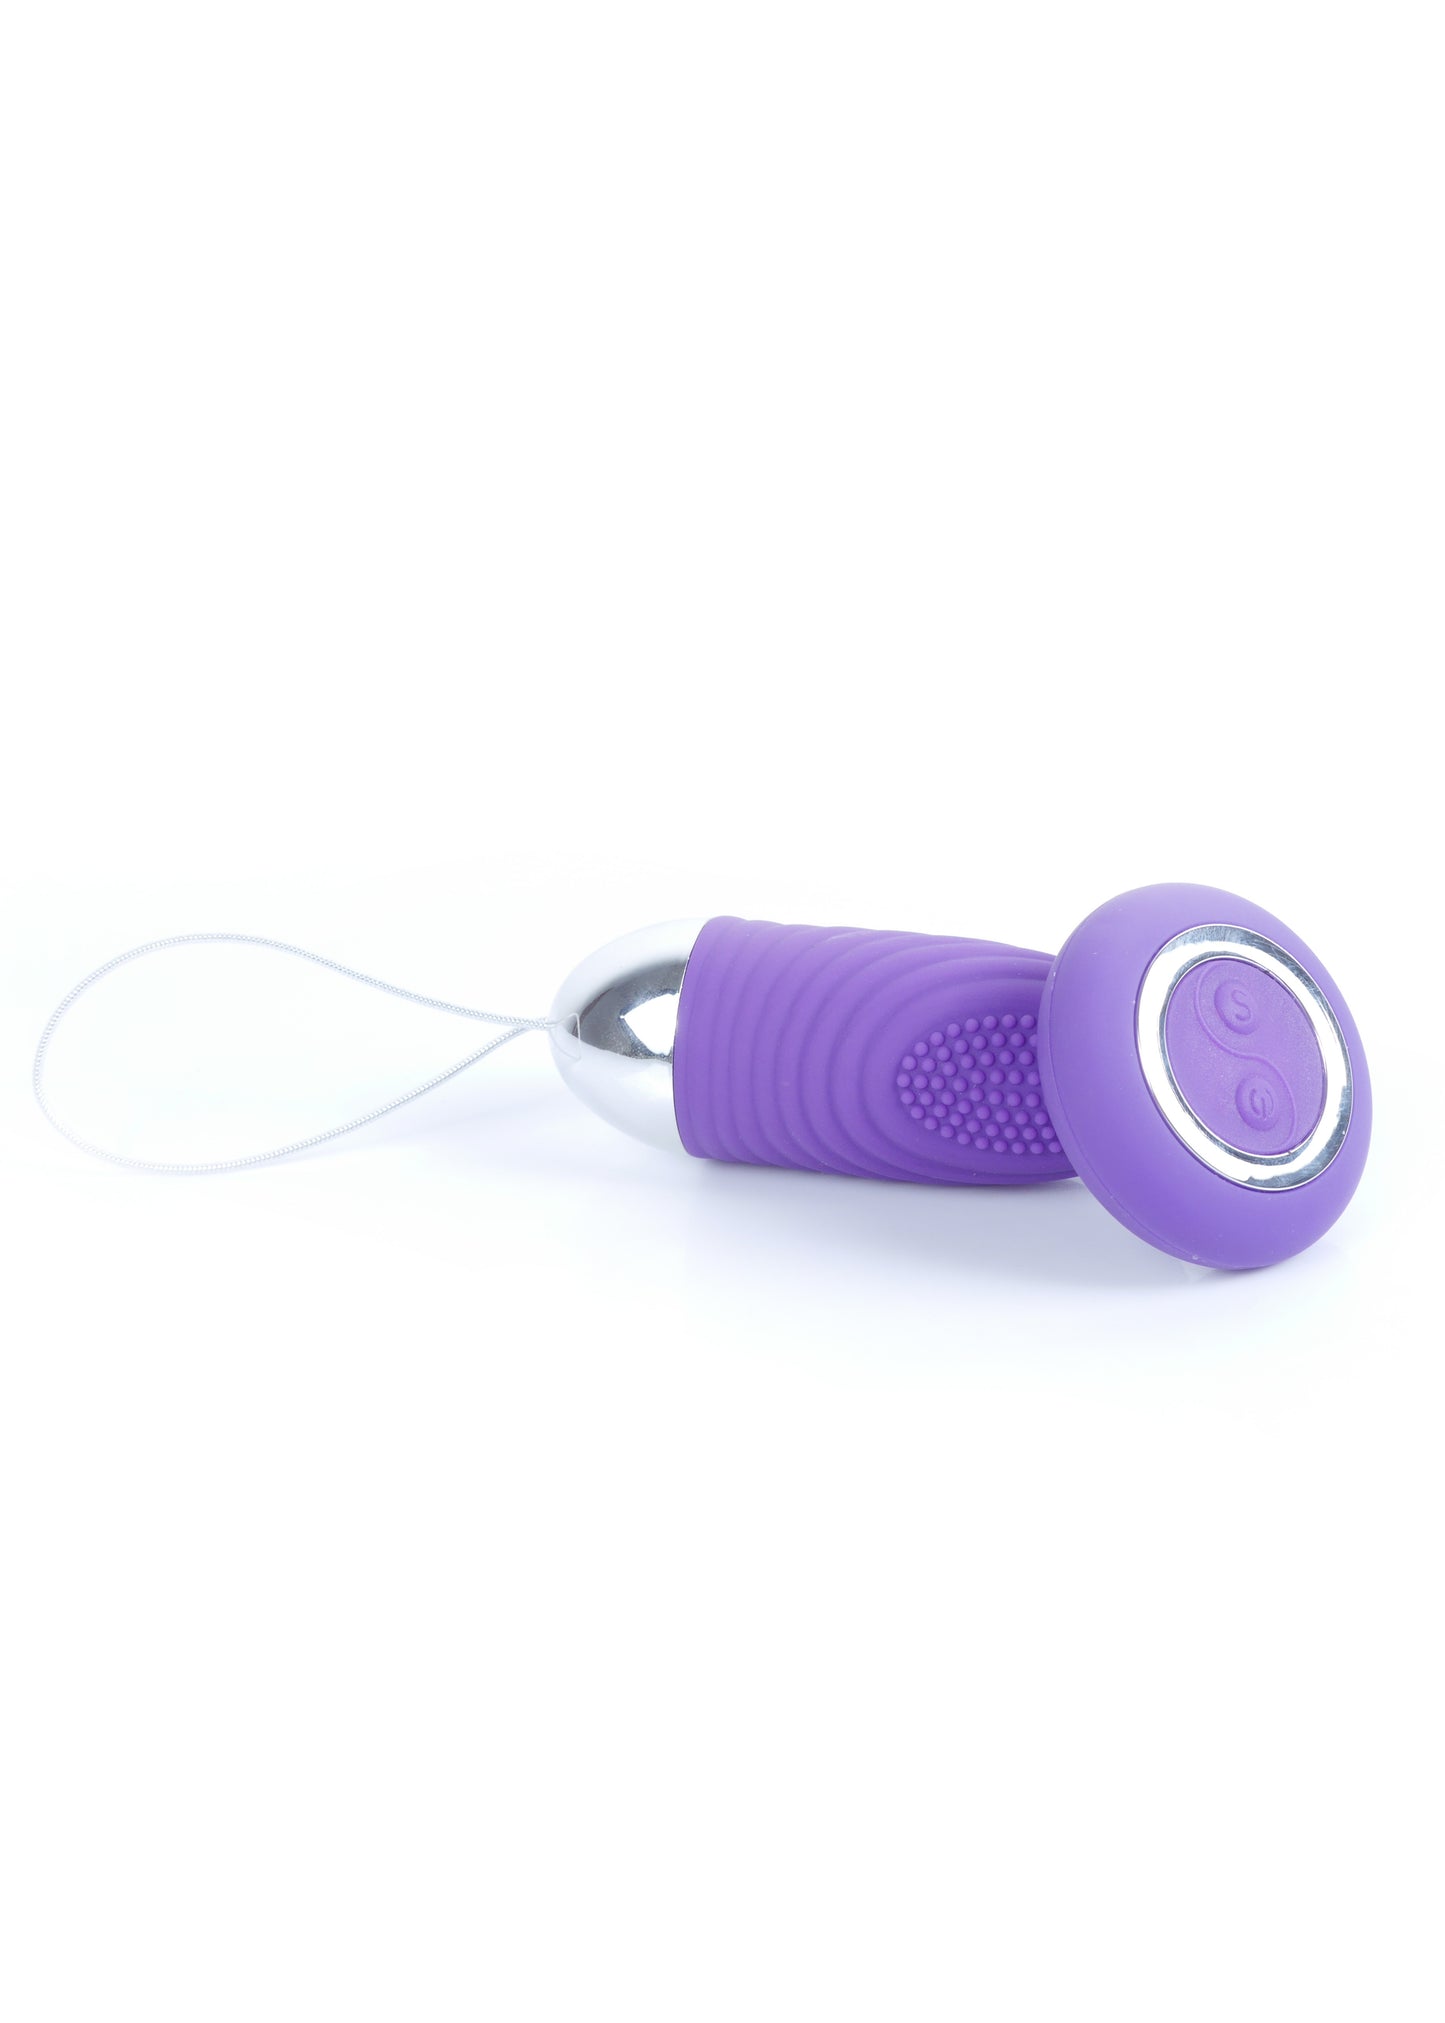 Bossoftoys - 26-00107 - Remoted controller egg - USB - Purple